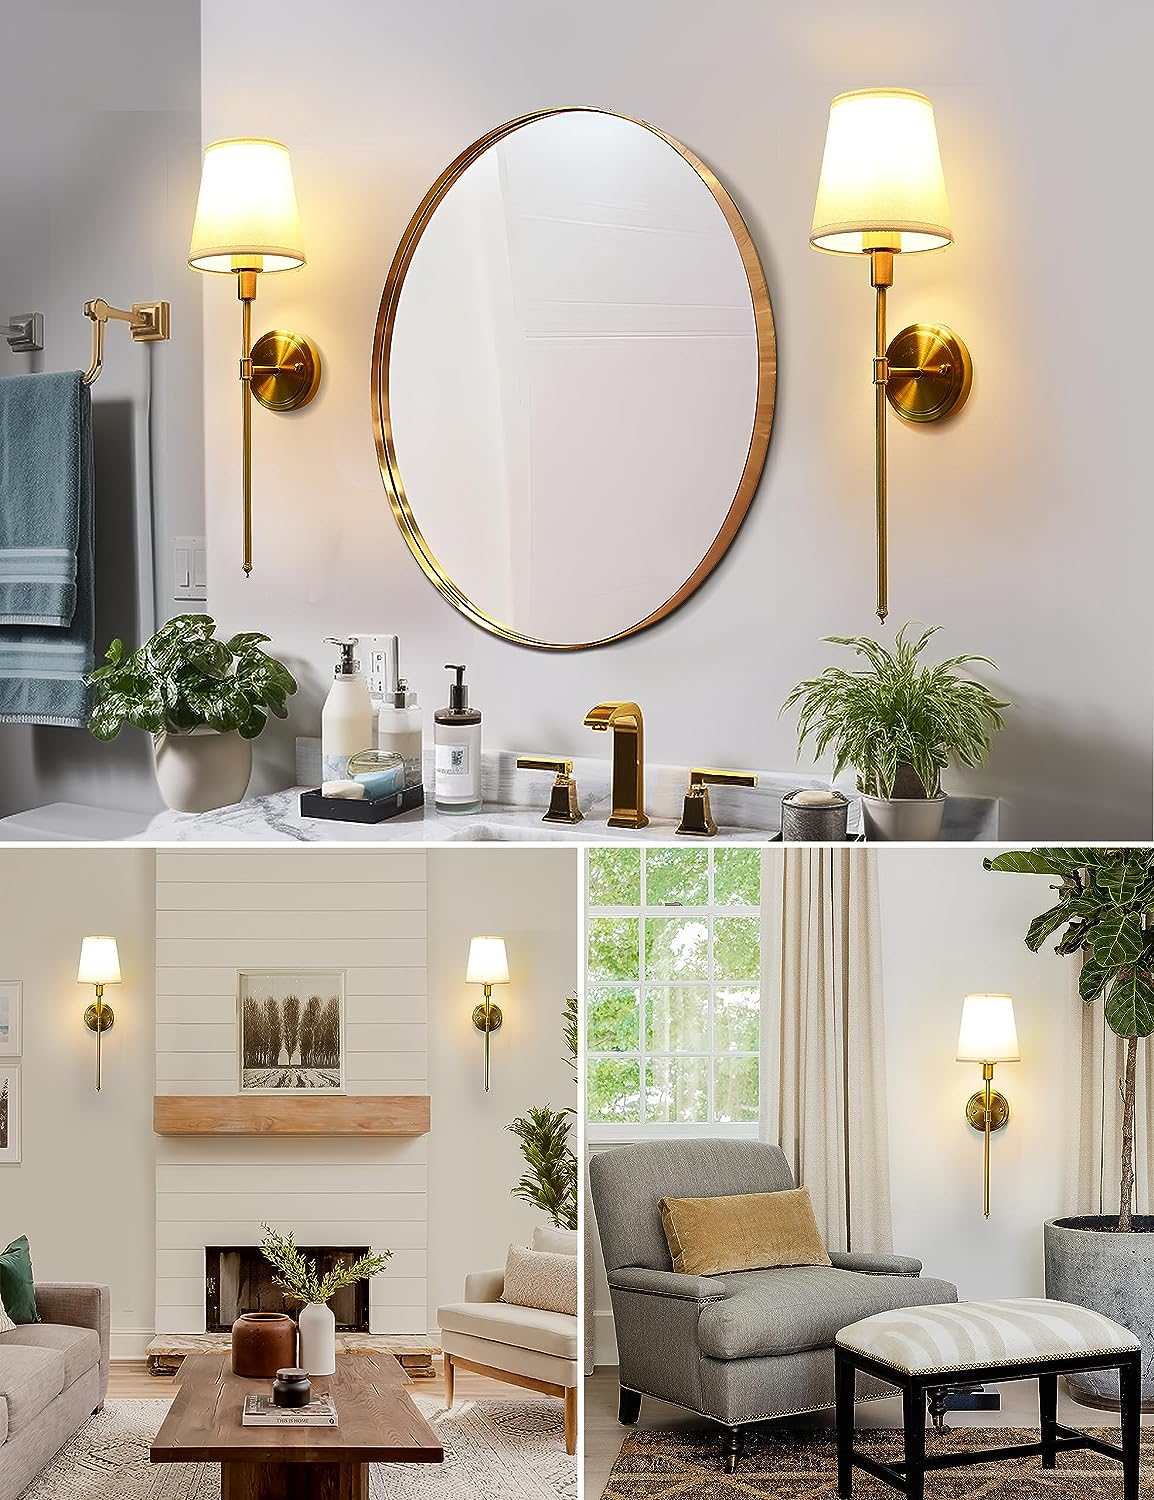 DORESshop Wall Sconces Sets of 2，Hardwired Column Stand Sconces Wall Lighting,Classic Brushed Brass Wall Lamp with Fabric Shade，Wall Lamps for Living Room Bedroom Kitchen